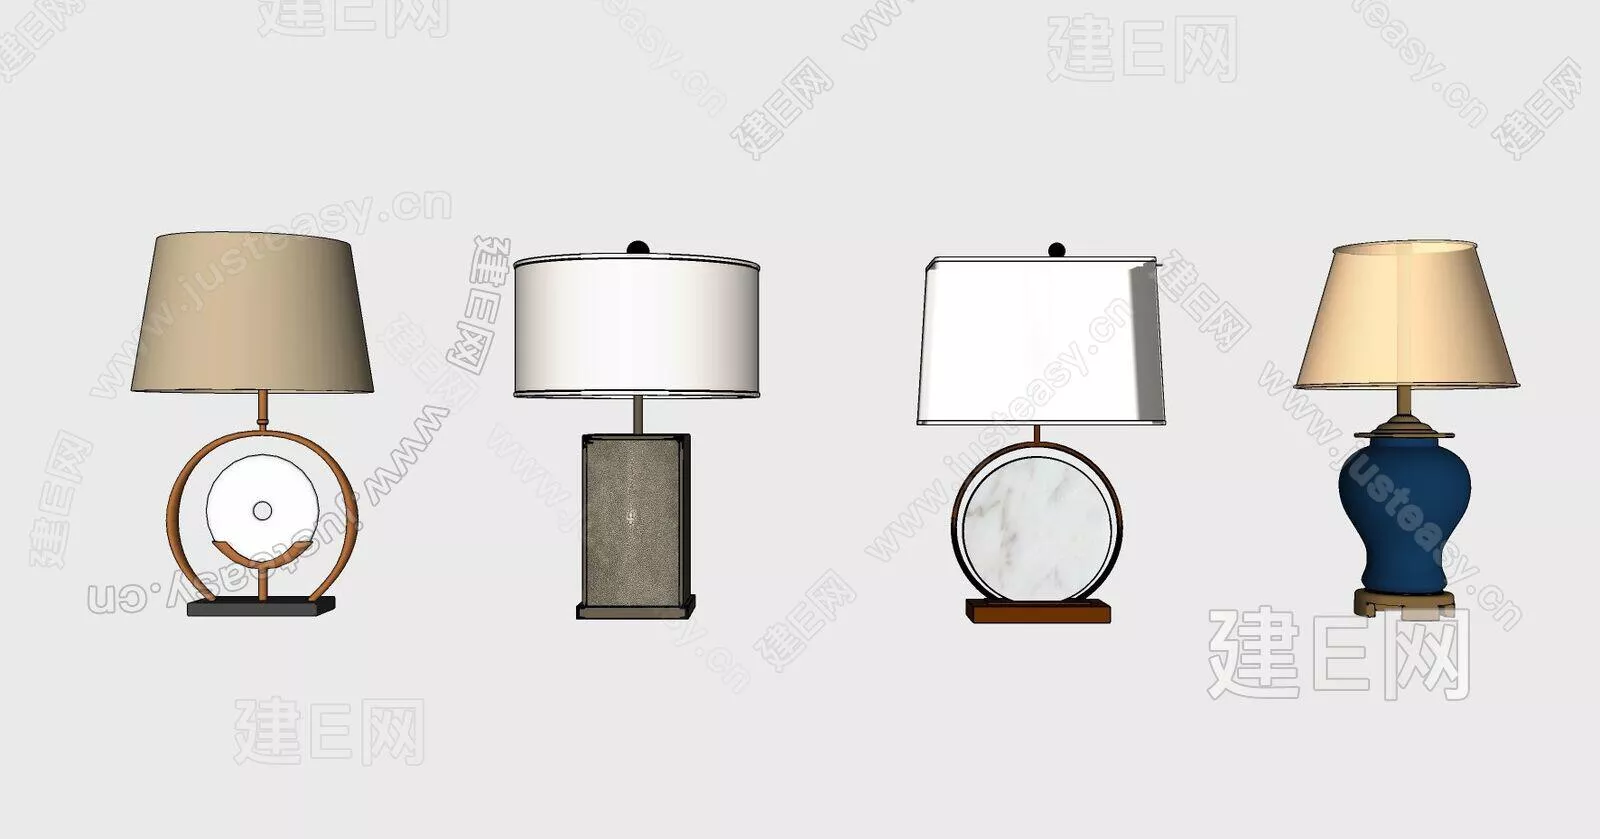 CHINESE TABLE LAMP - SKETCHUP 3D MODEL - ENSCAPE - 112542031